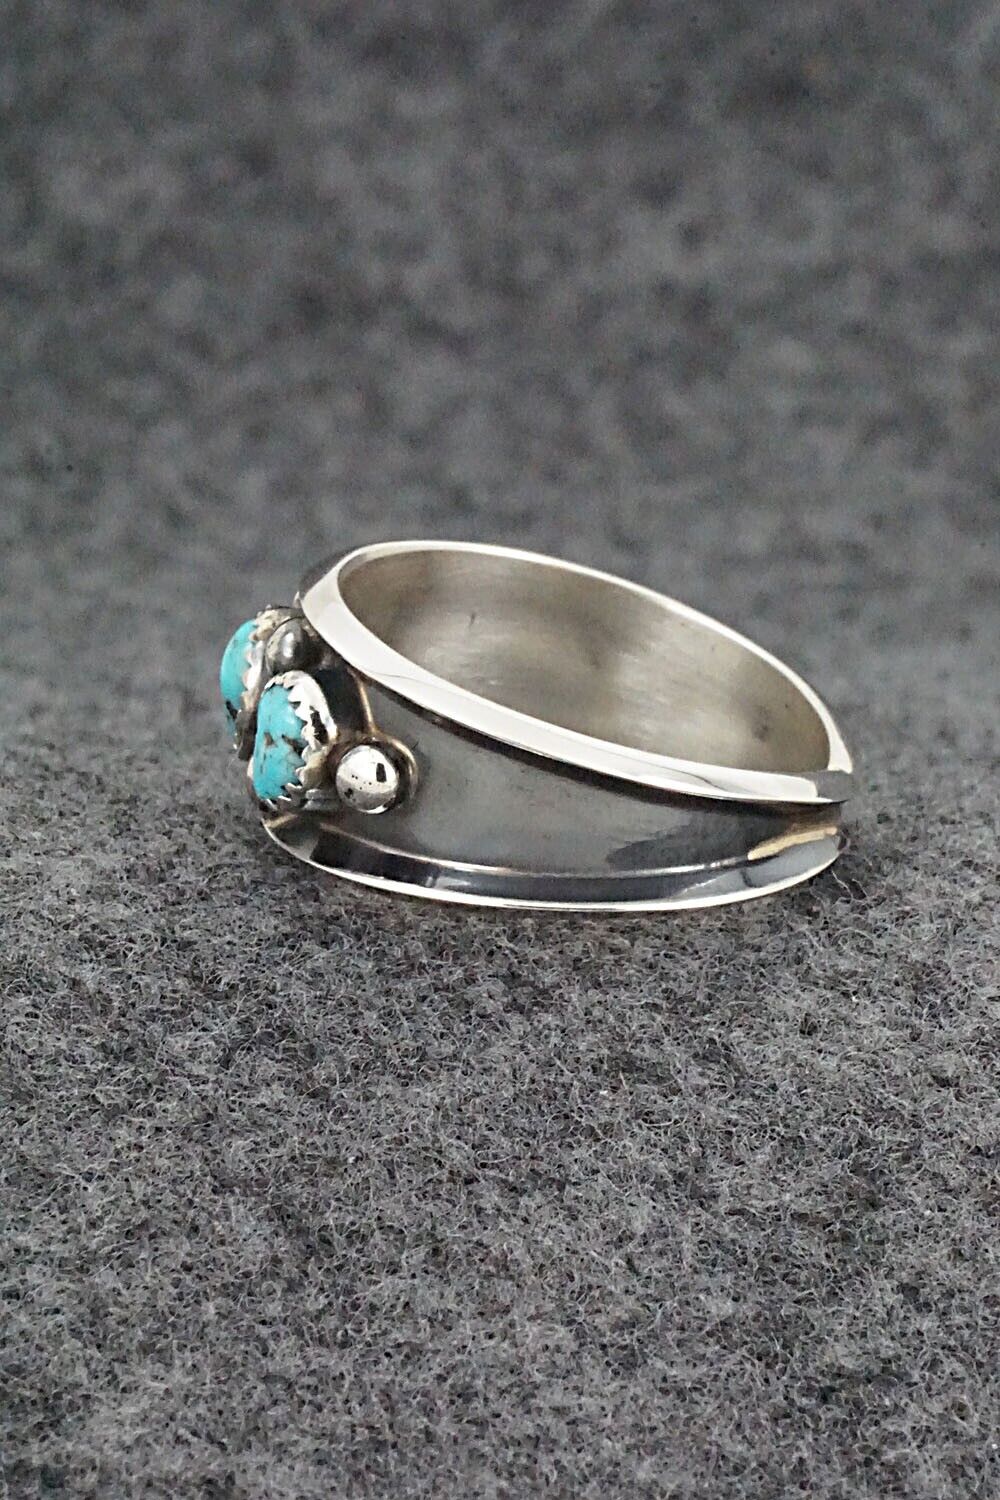 Turquoise & Sterling Silver Ring - Paul Largo - Size 11.75